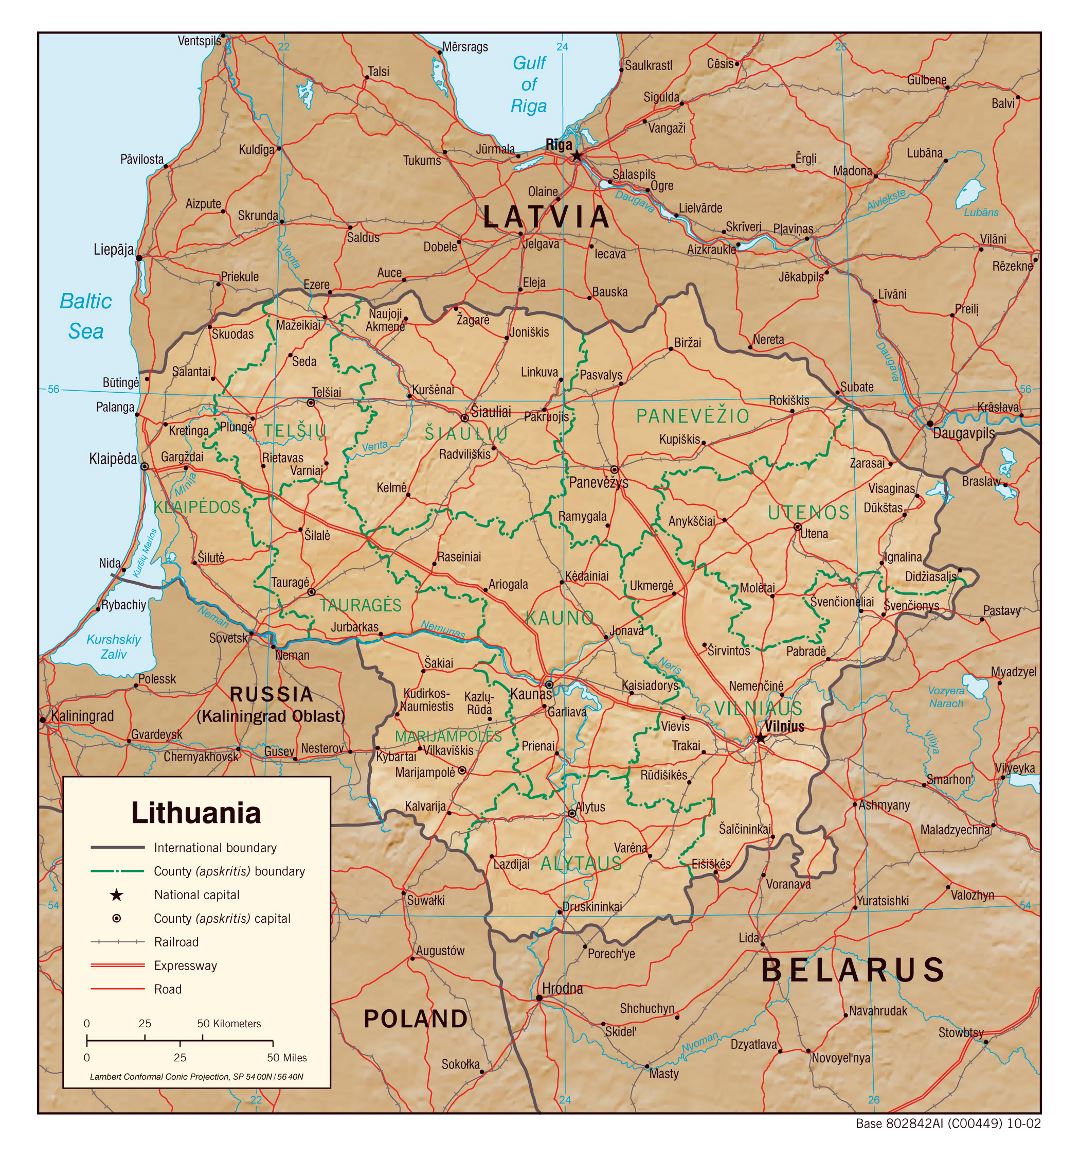 Large scale political and administrative map of Lithuania with relief, roads, railroads and major cities - 2002